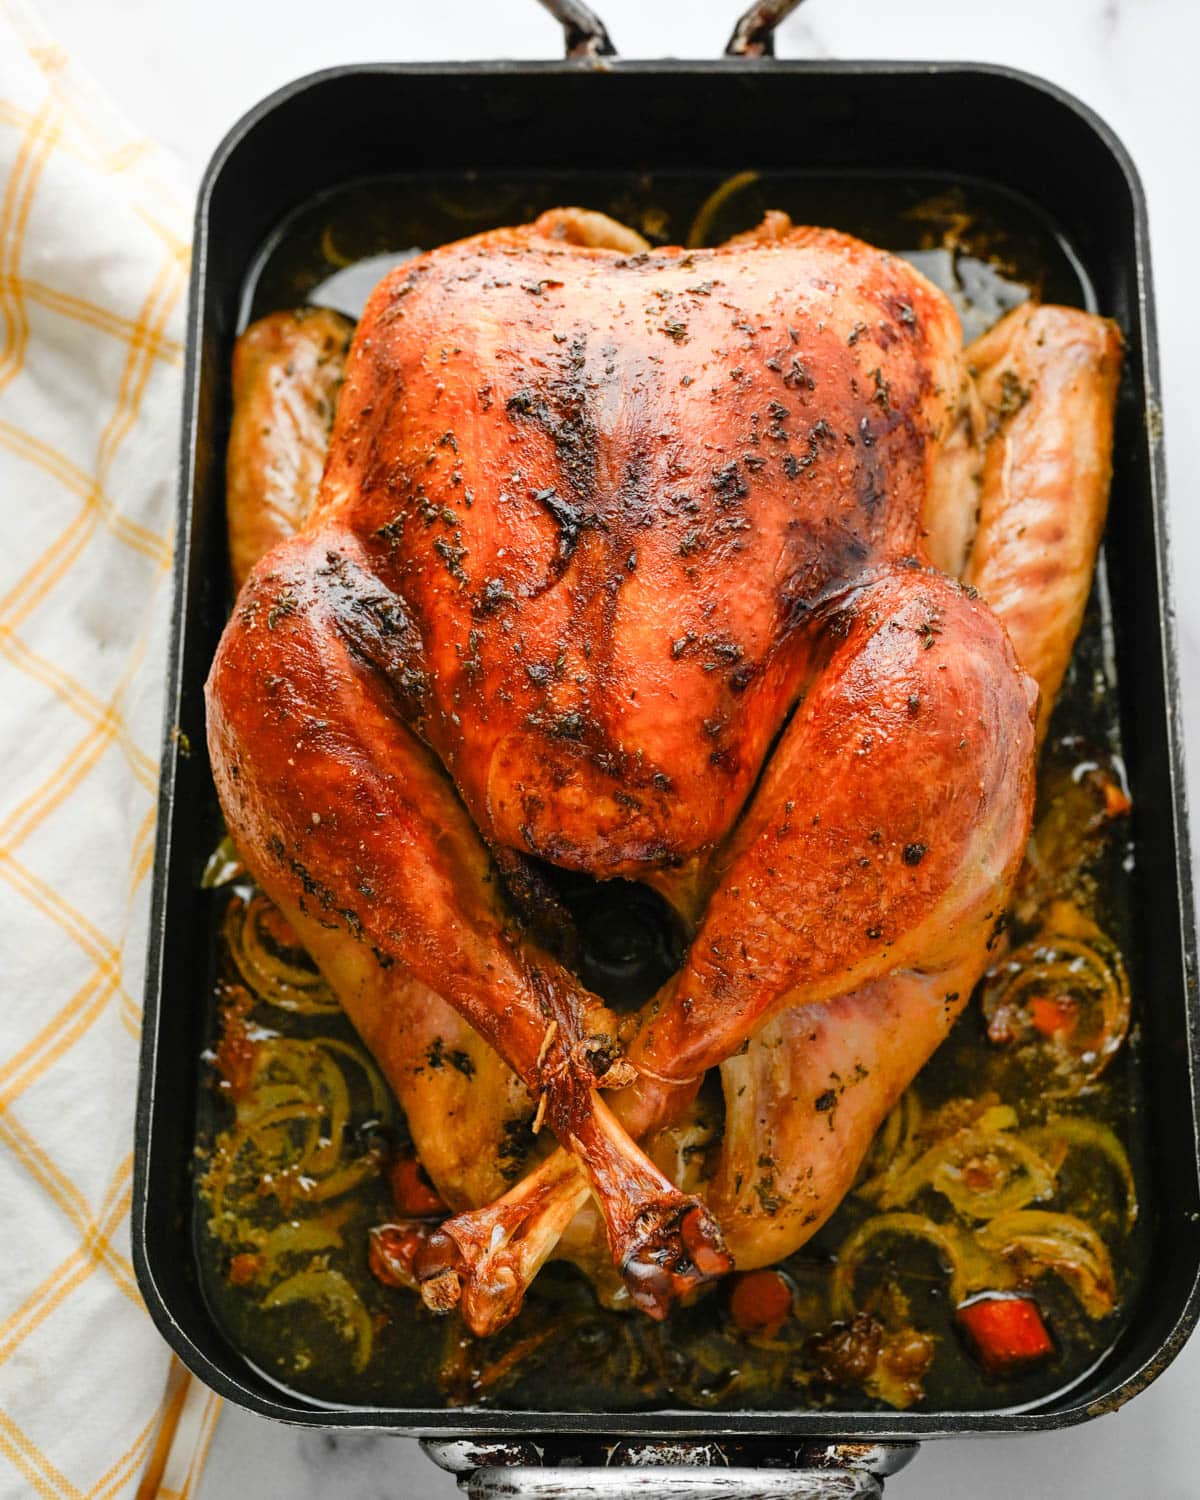 The roasted turkey in the roasting pan with vegetables. 